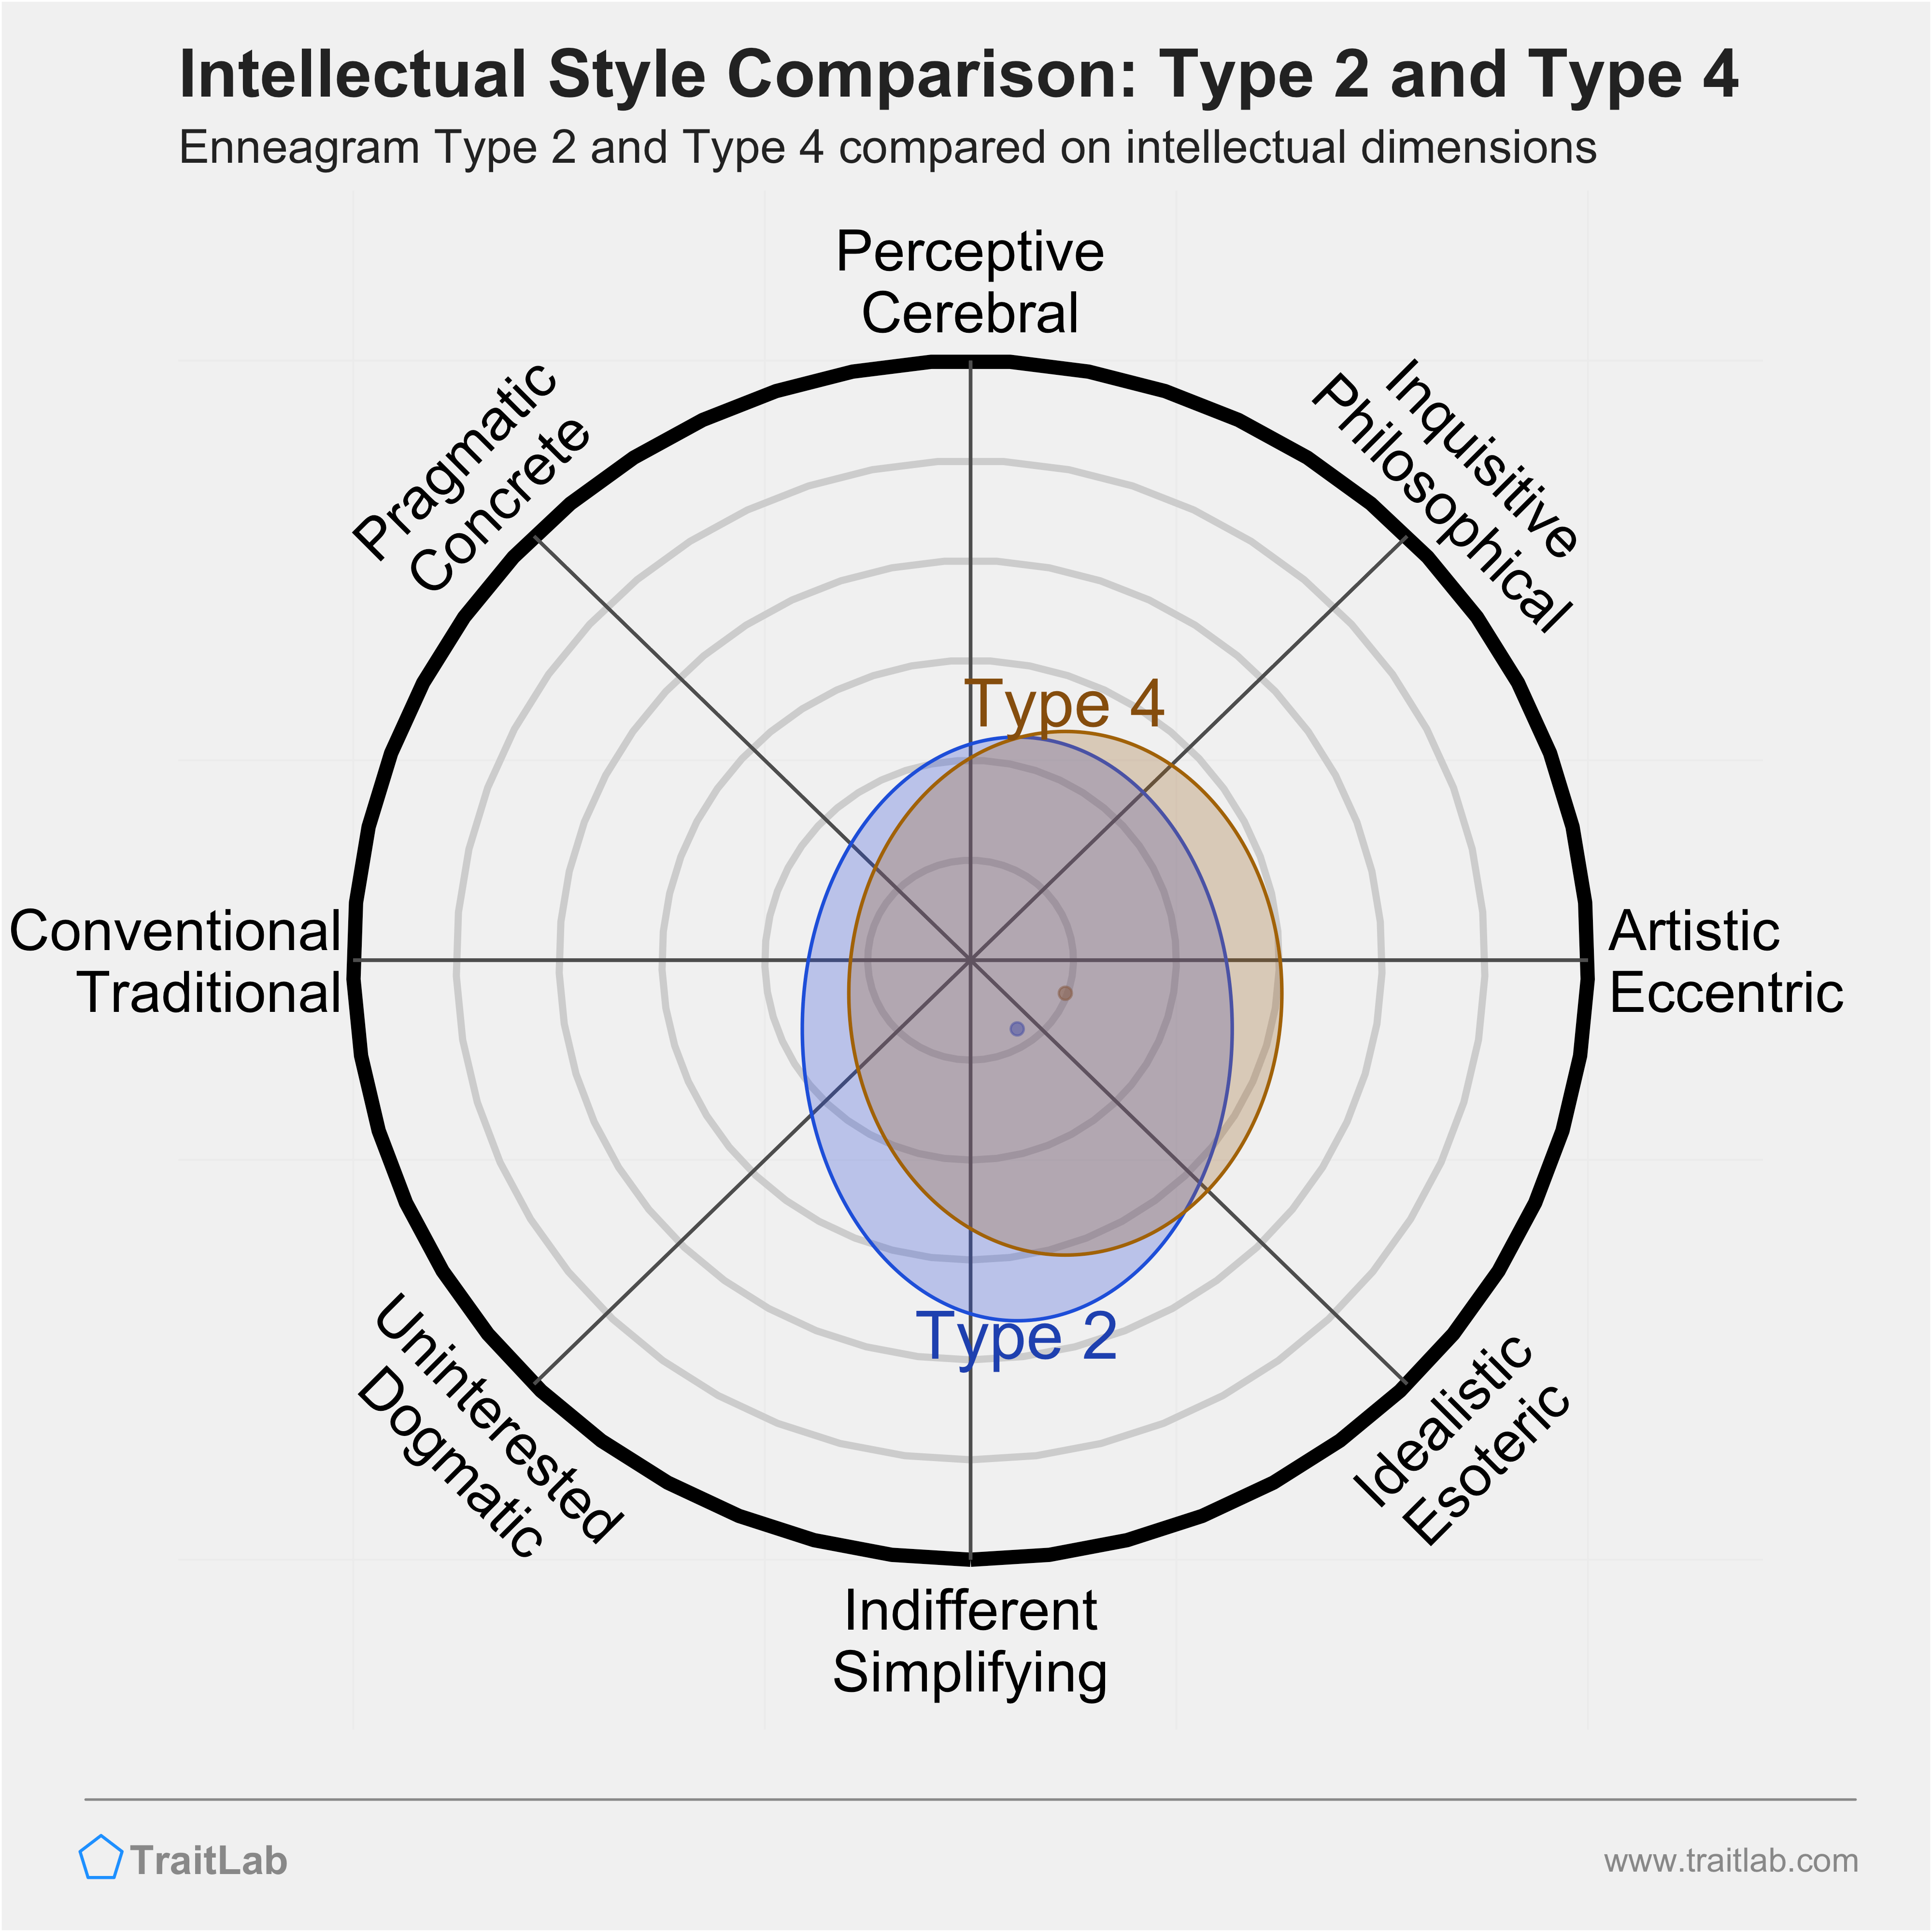 Type 2 and Type 4 comparison across intellectual dimensions